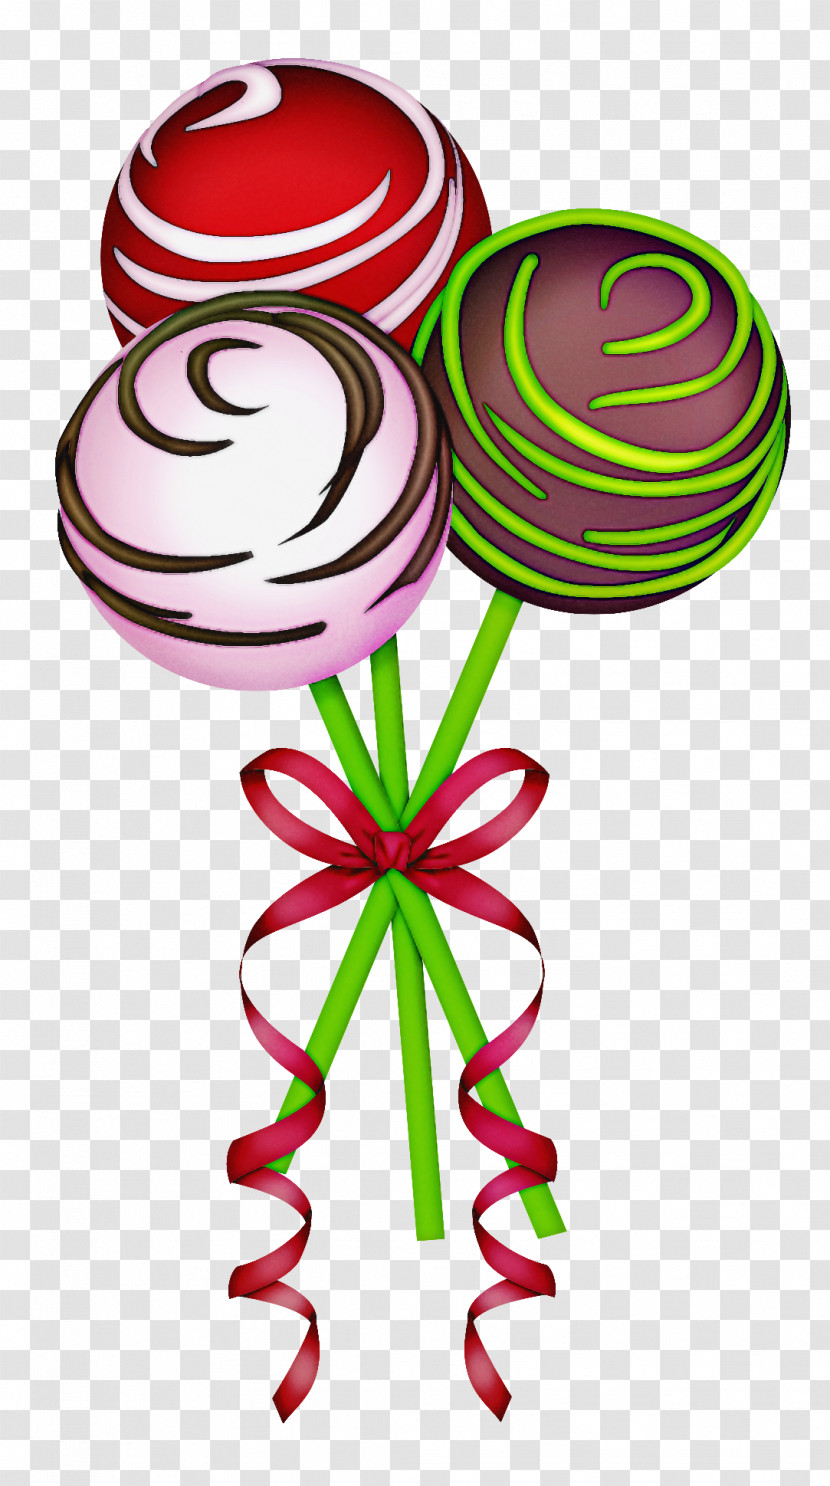 Lollipop Stick Candy Confectionery Candy Transparent PNG